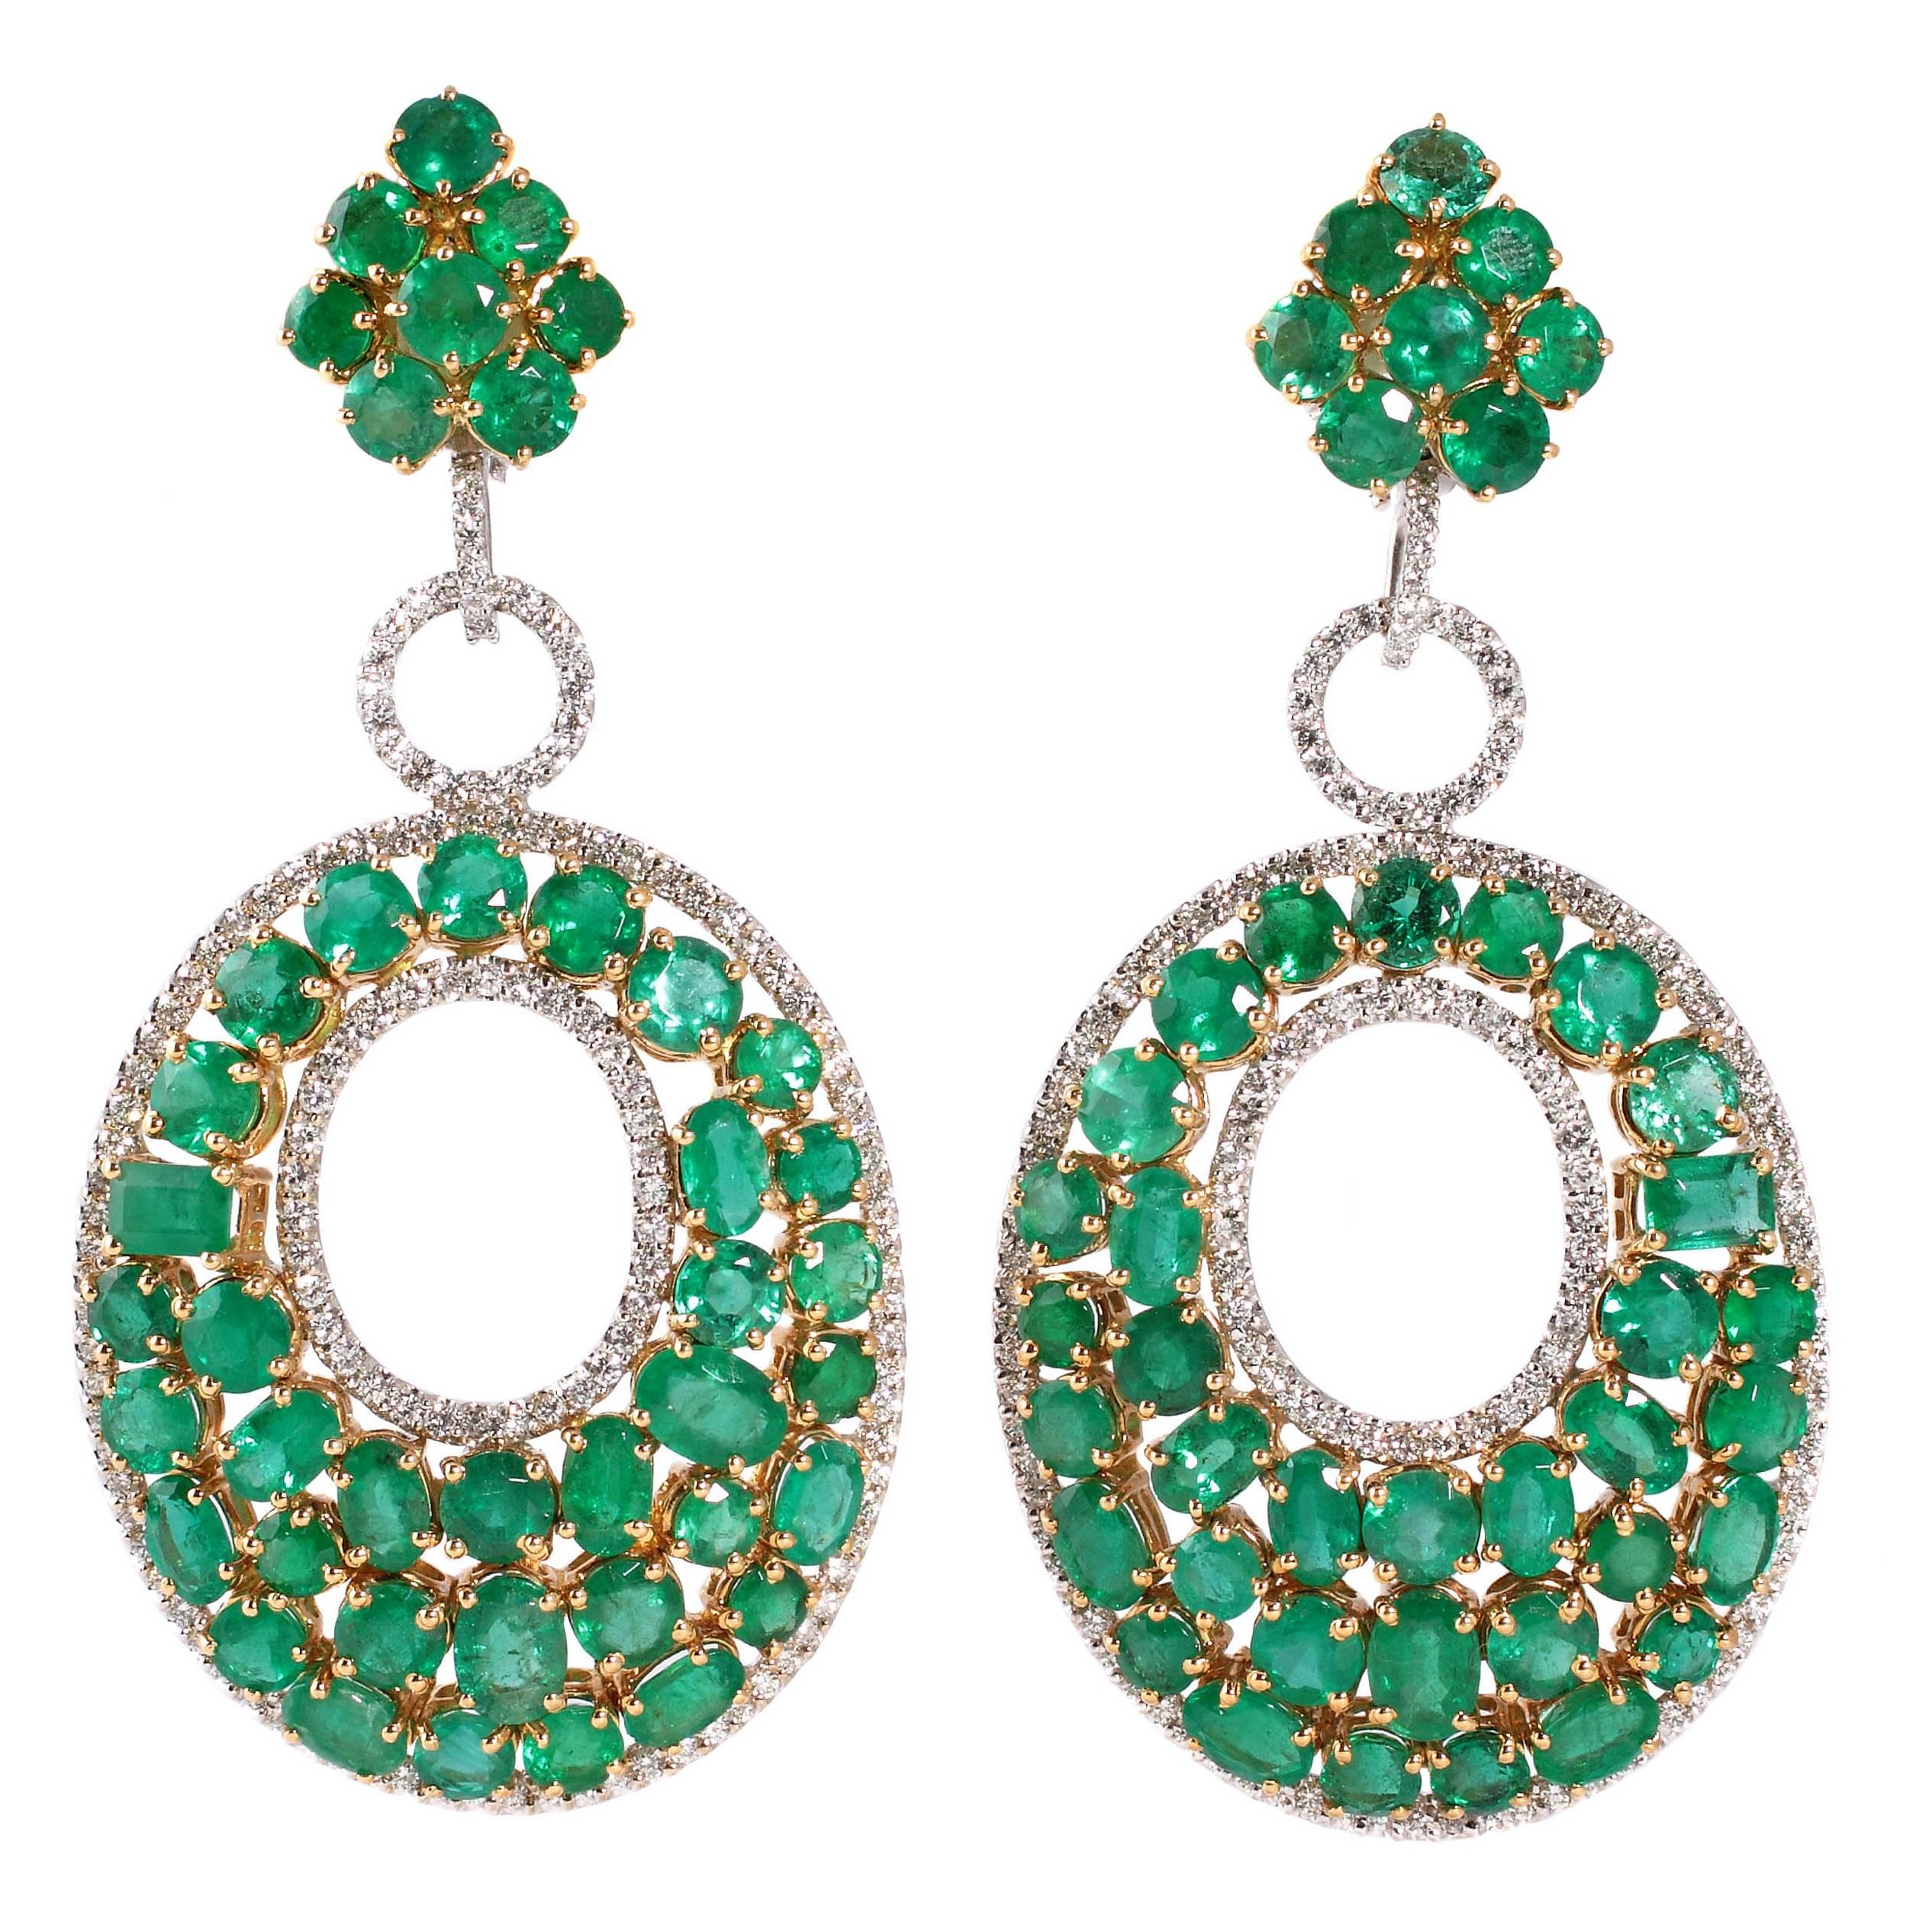 32.00 carat emerald and accent diamond earrings